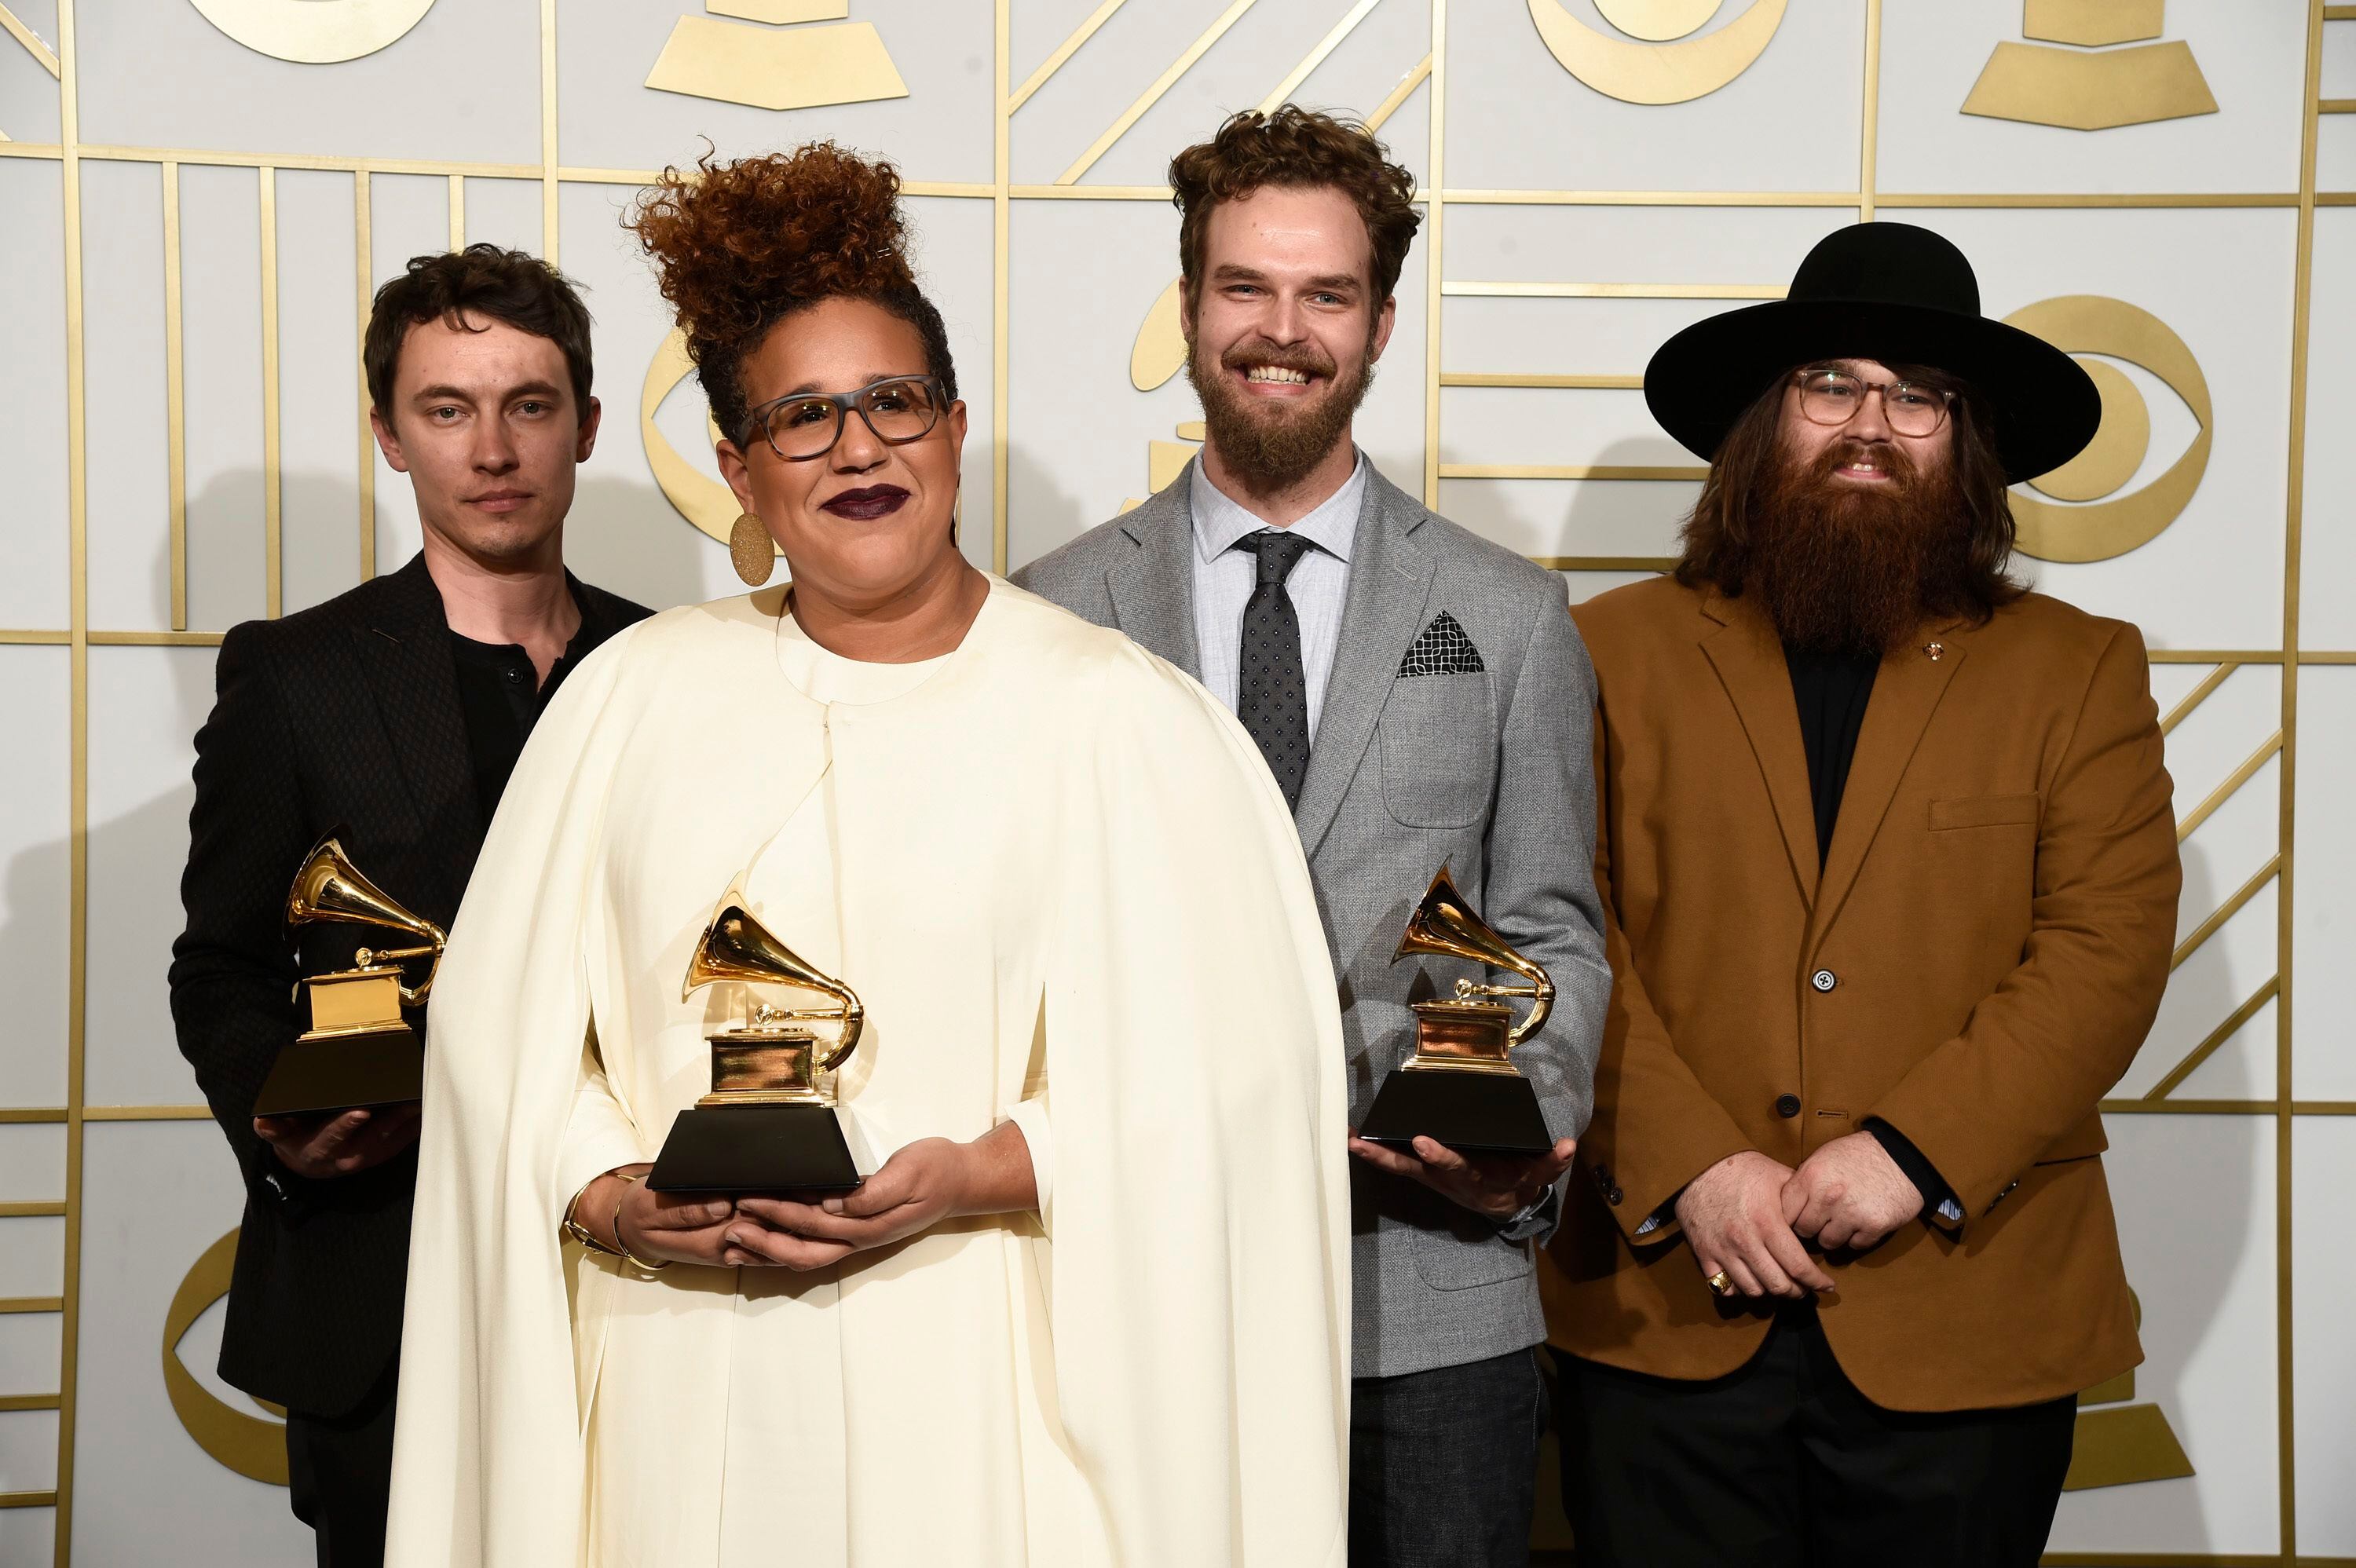 Alabama Shakes drummer facing child abuse charges